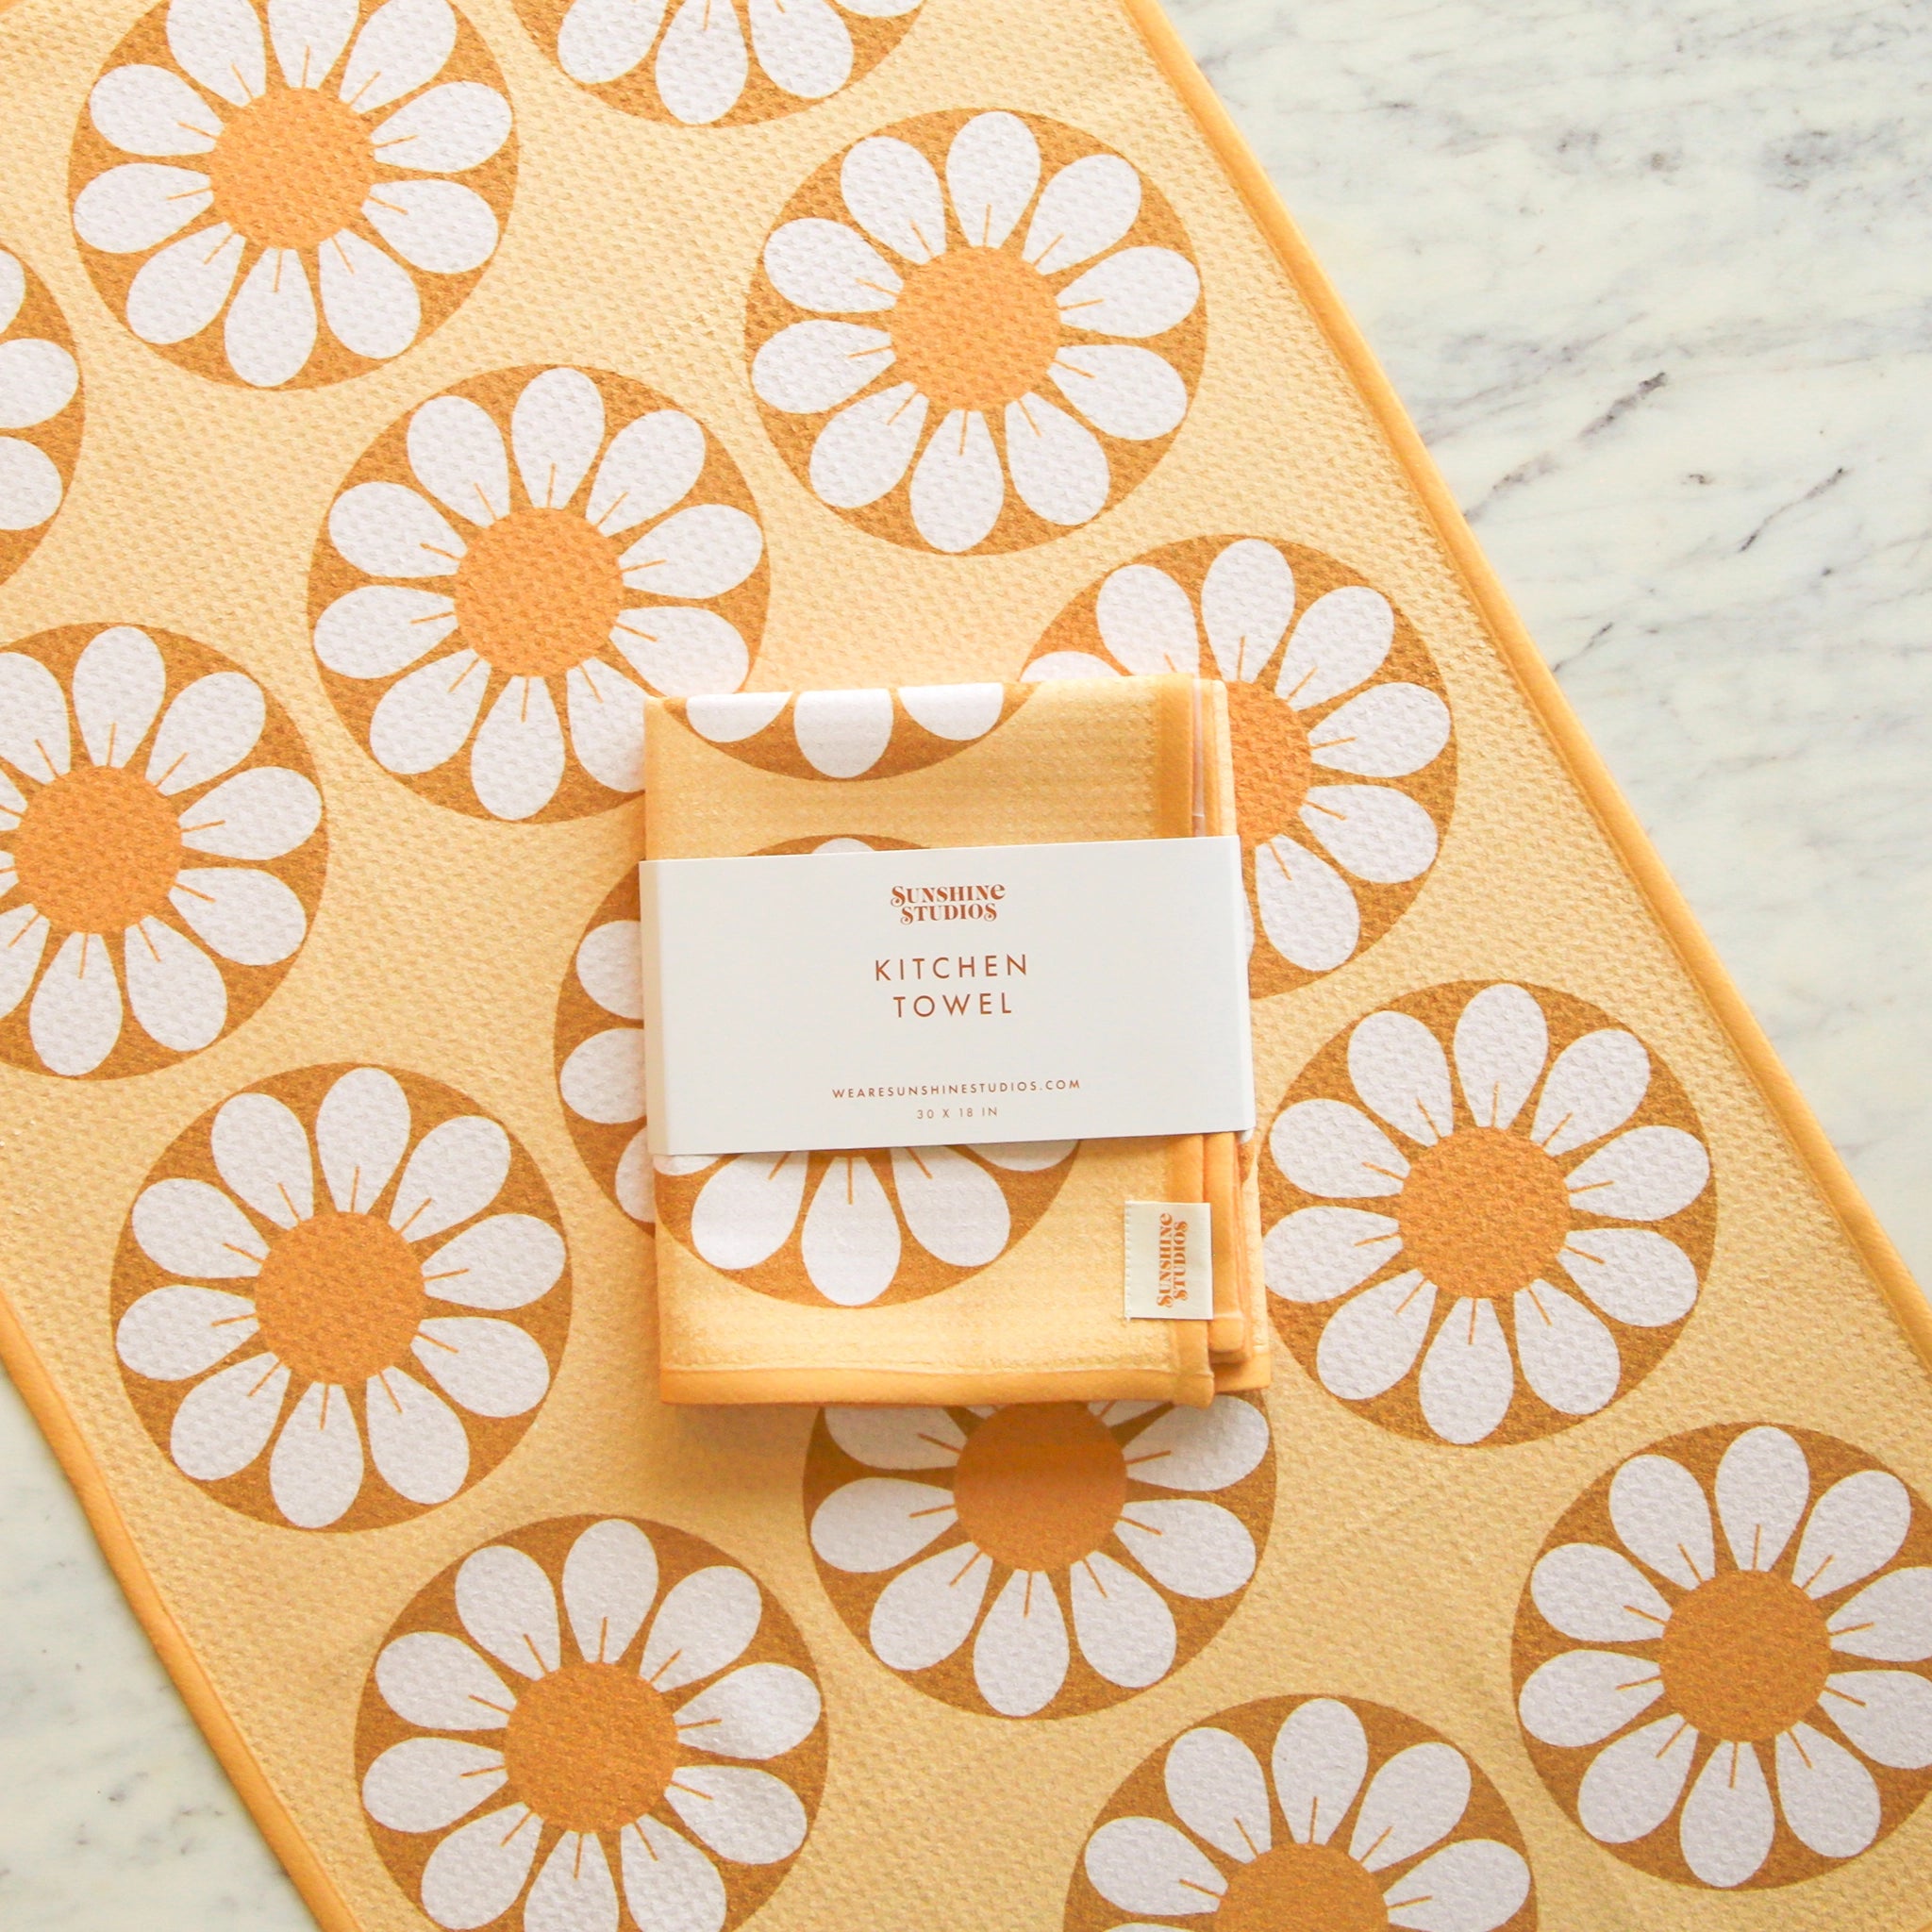 On a marble background is a yellow and white daisy print kitchen towel with a subtle waffle texture along with the folded towel in the center to show how the item arrives. One towel per purchase. 